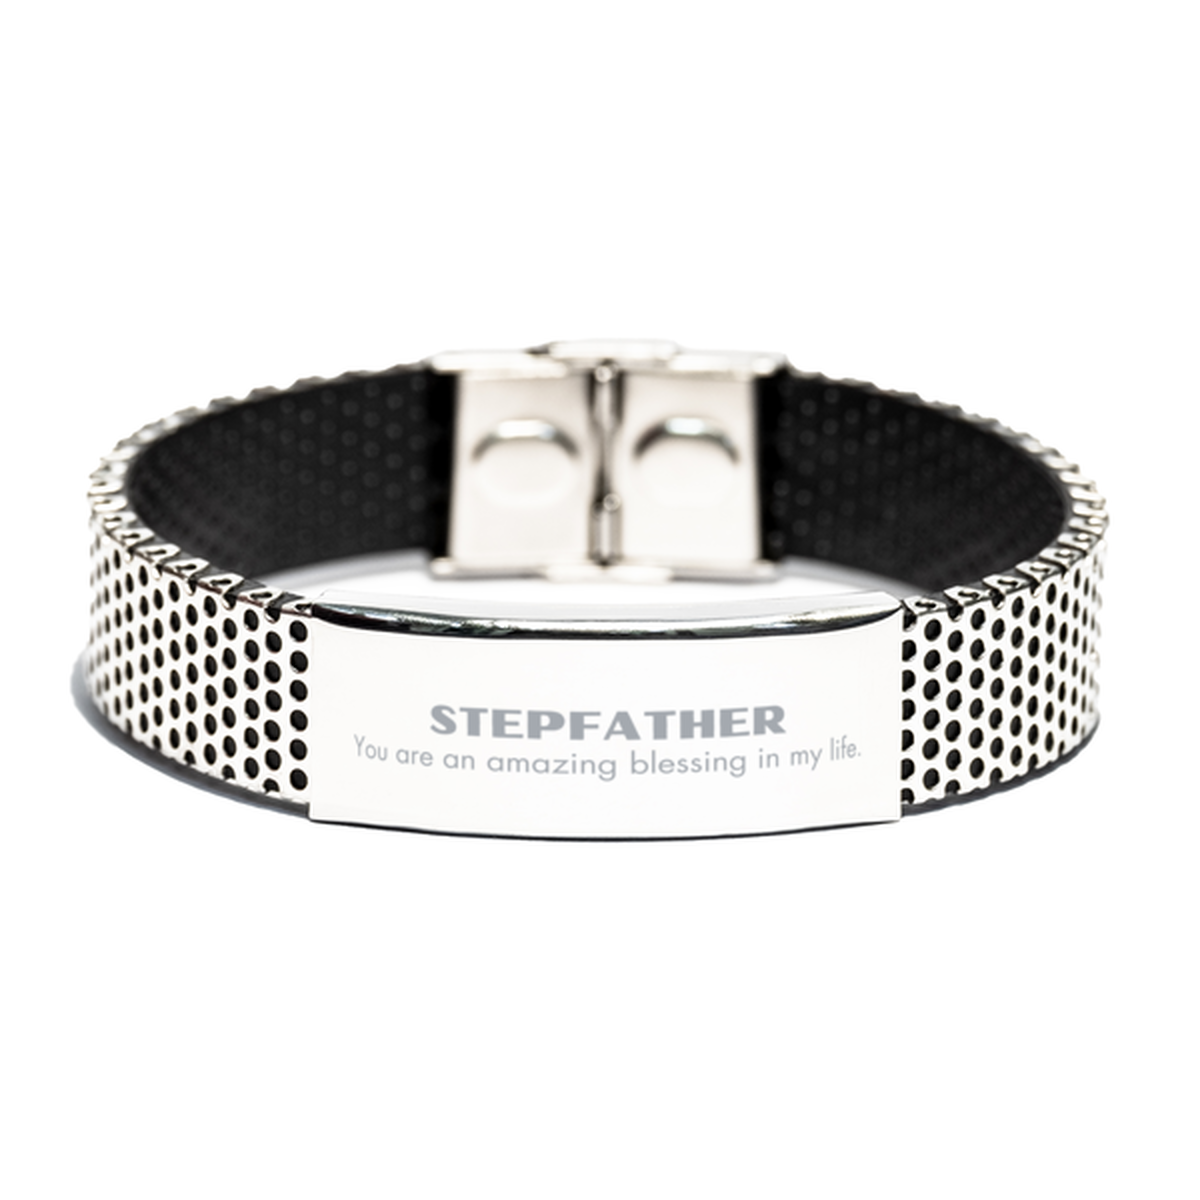 Stepfather Stainless Steel Bracelet, You are an amazing blessing in my life, Thank You Gifts For Stepfather, Inspirational Birthday Christmas Unique Gifts For Stepfather